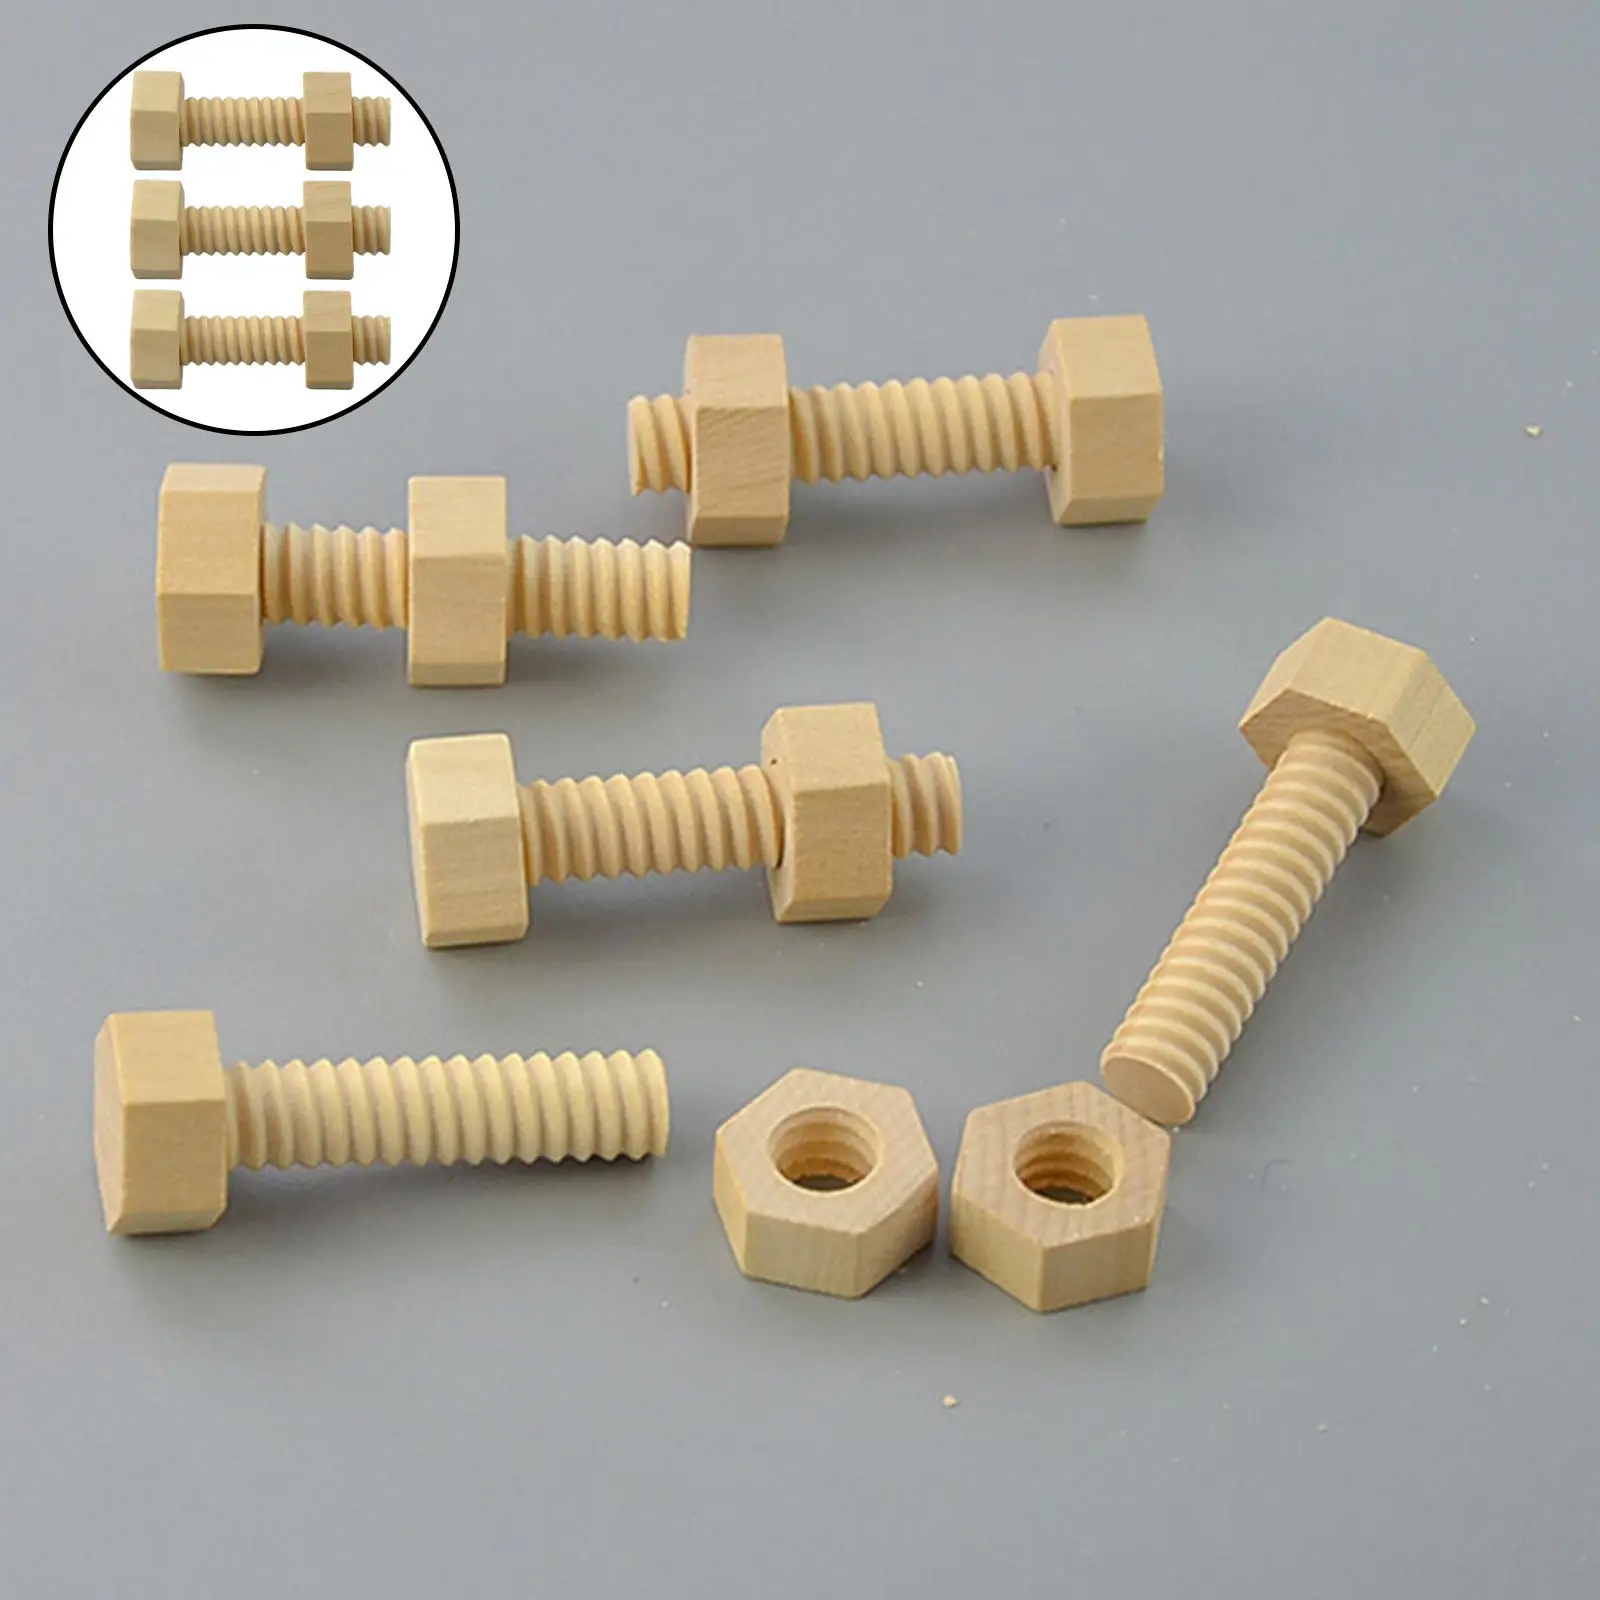 Screw Nut Assembling Toy Montessori Hands-on Skills Puzzle for Boys Girls